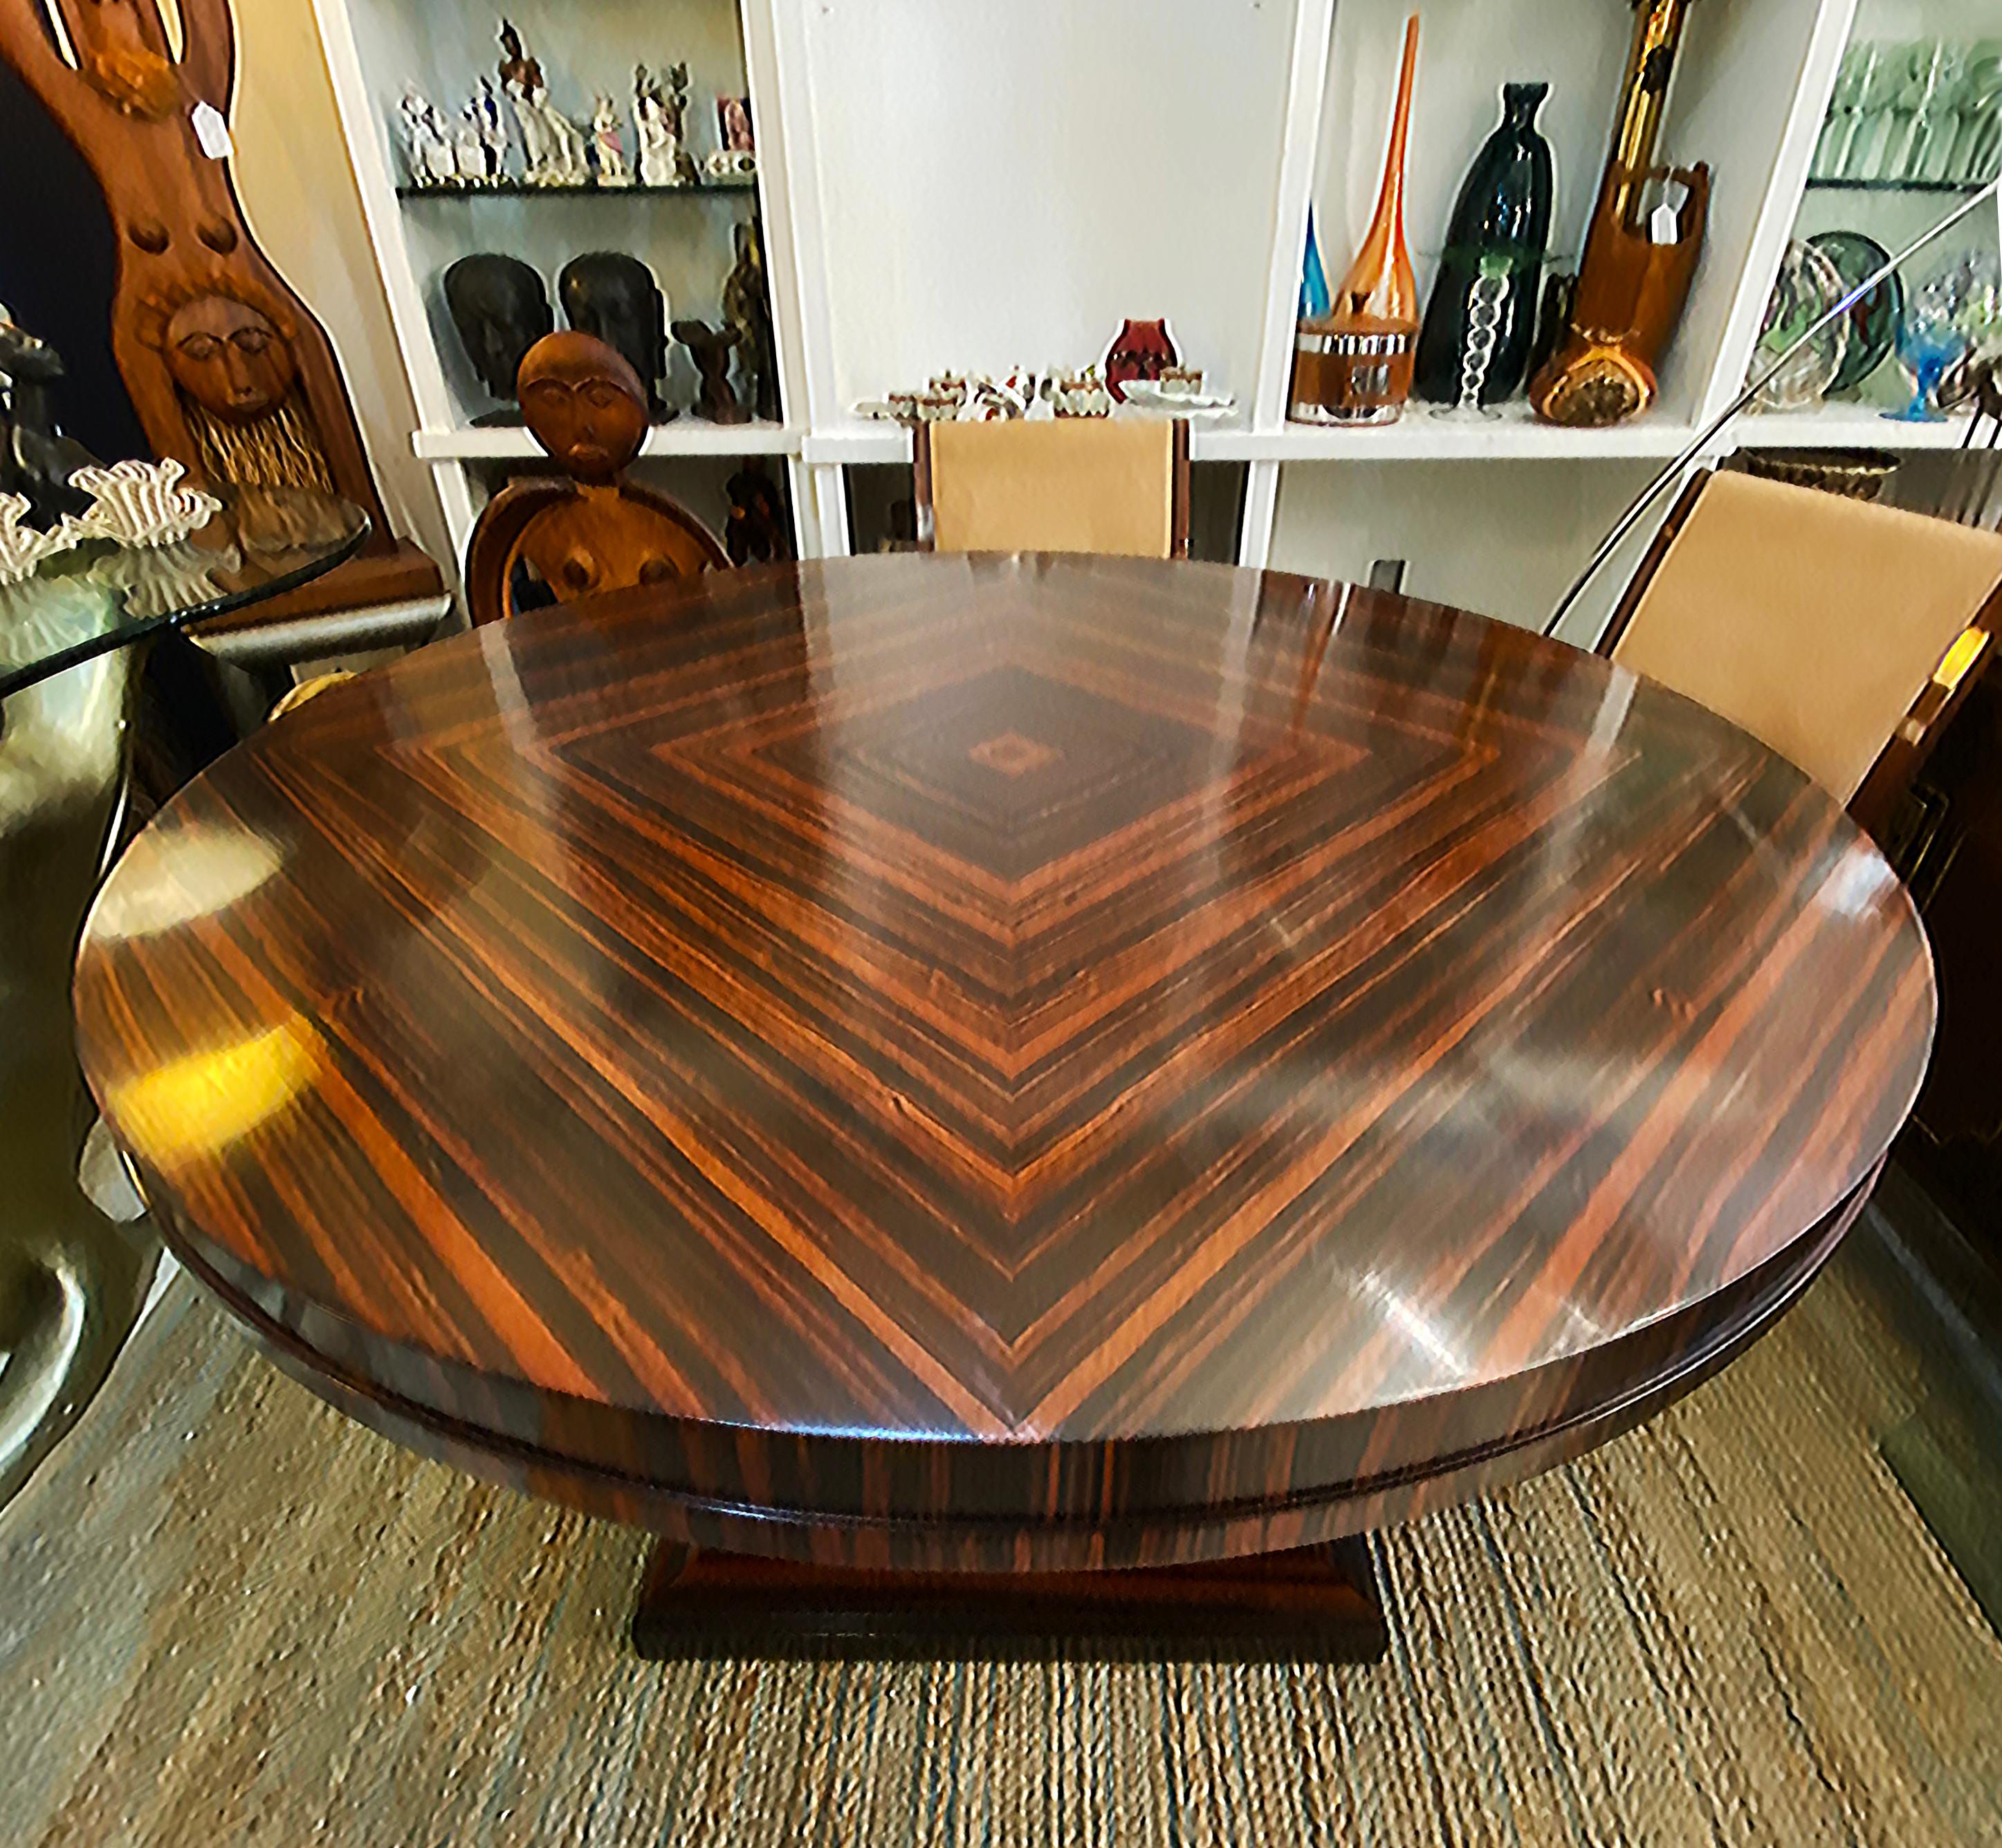 Art Deco Macassar Ebony Round Dining Center Table, Beautifully Veneered Wood

Offered for sale is a  wonderful round matched-grain macassar ebony center table or dining table. The table is created in the Art Deco style with a square base having four